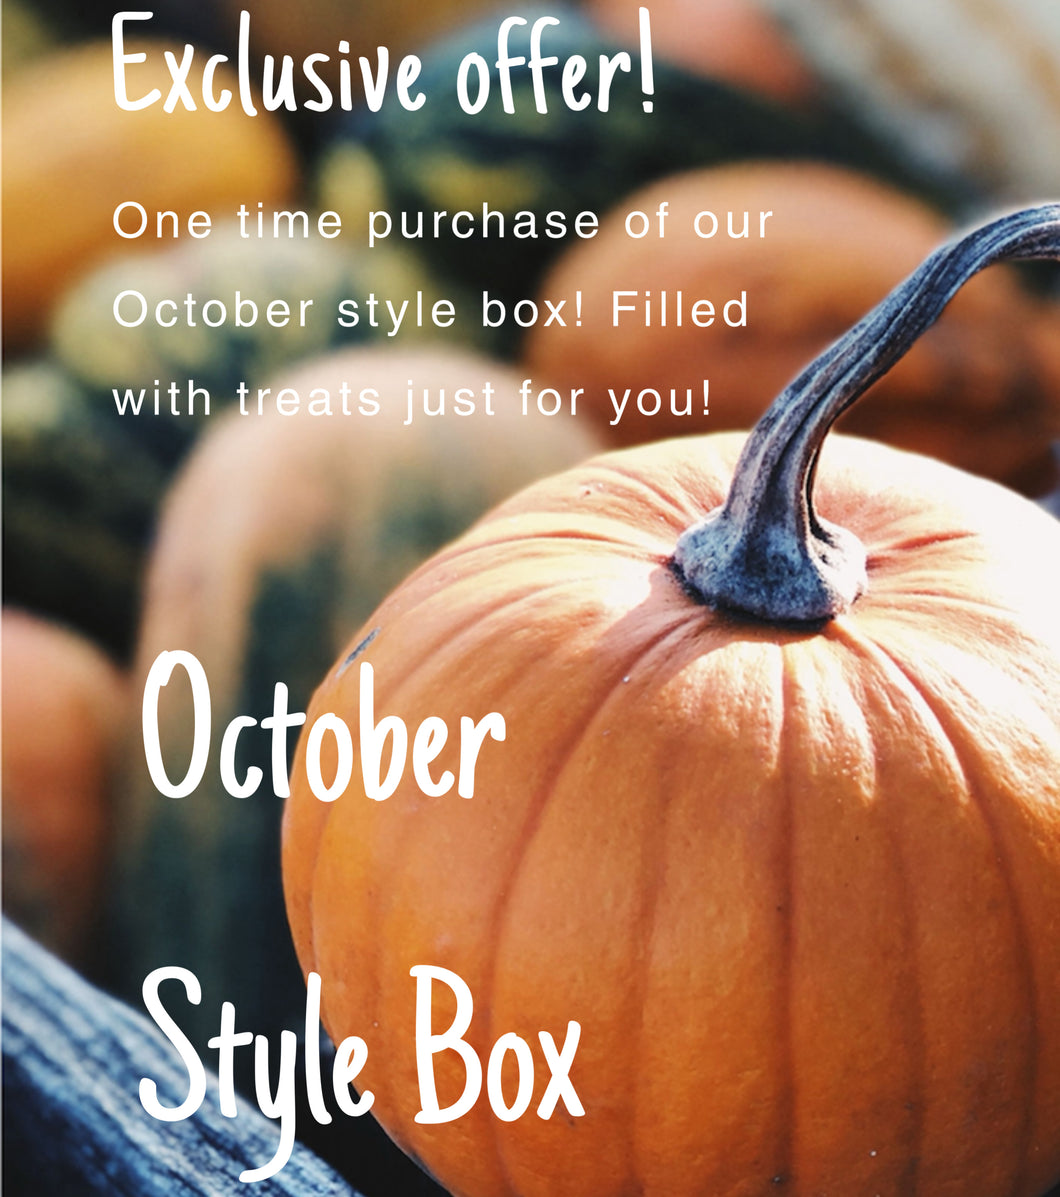 October Only - Style Box Special Buy